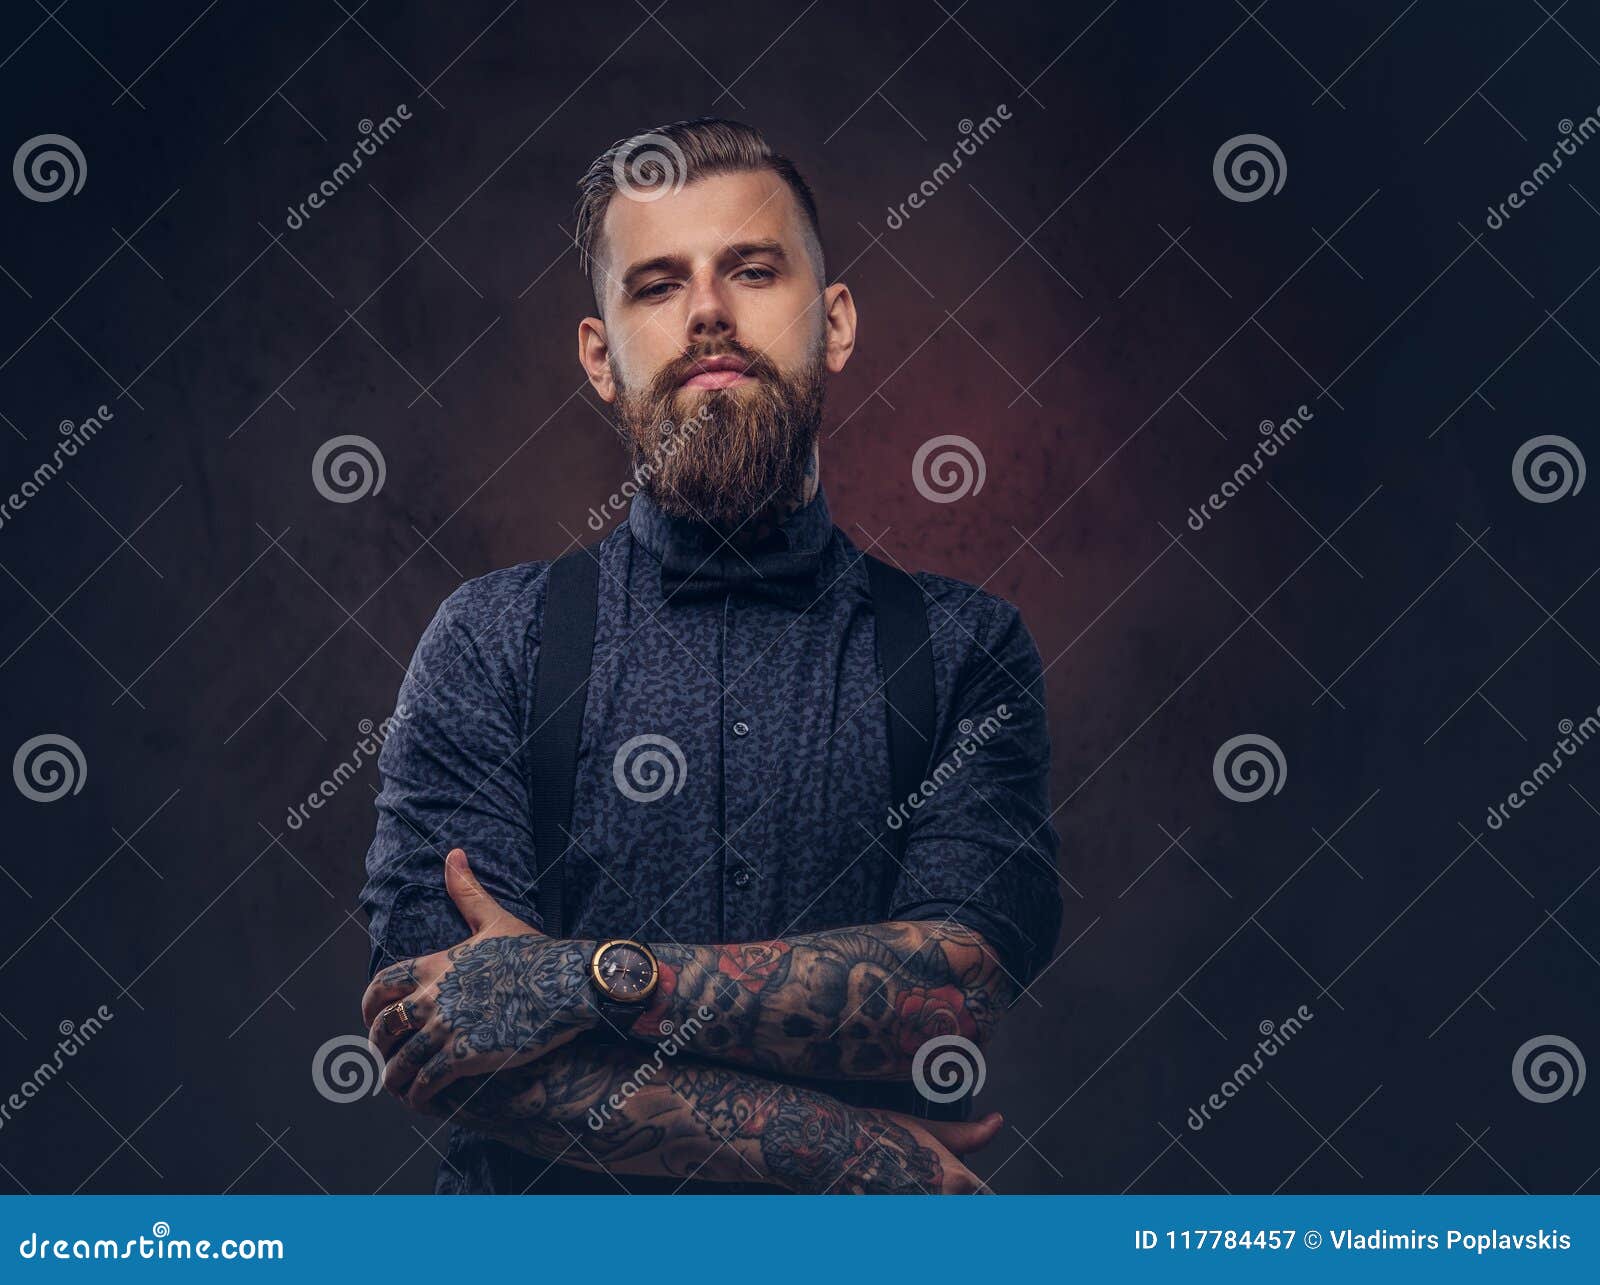 Portrait of a Handsome Old-fashioned Hipster in a Blue Shirt and ...